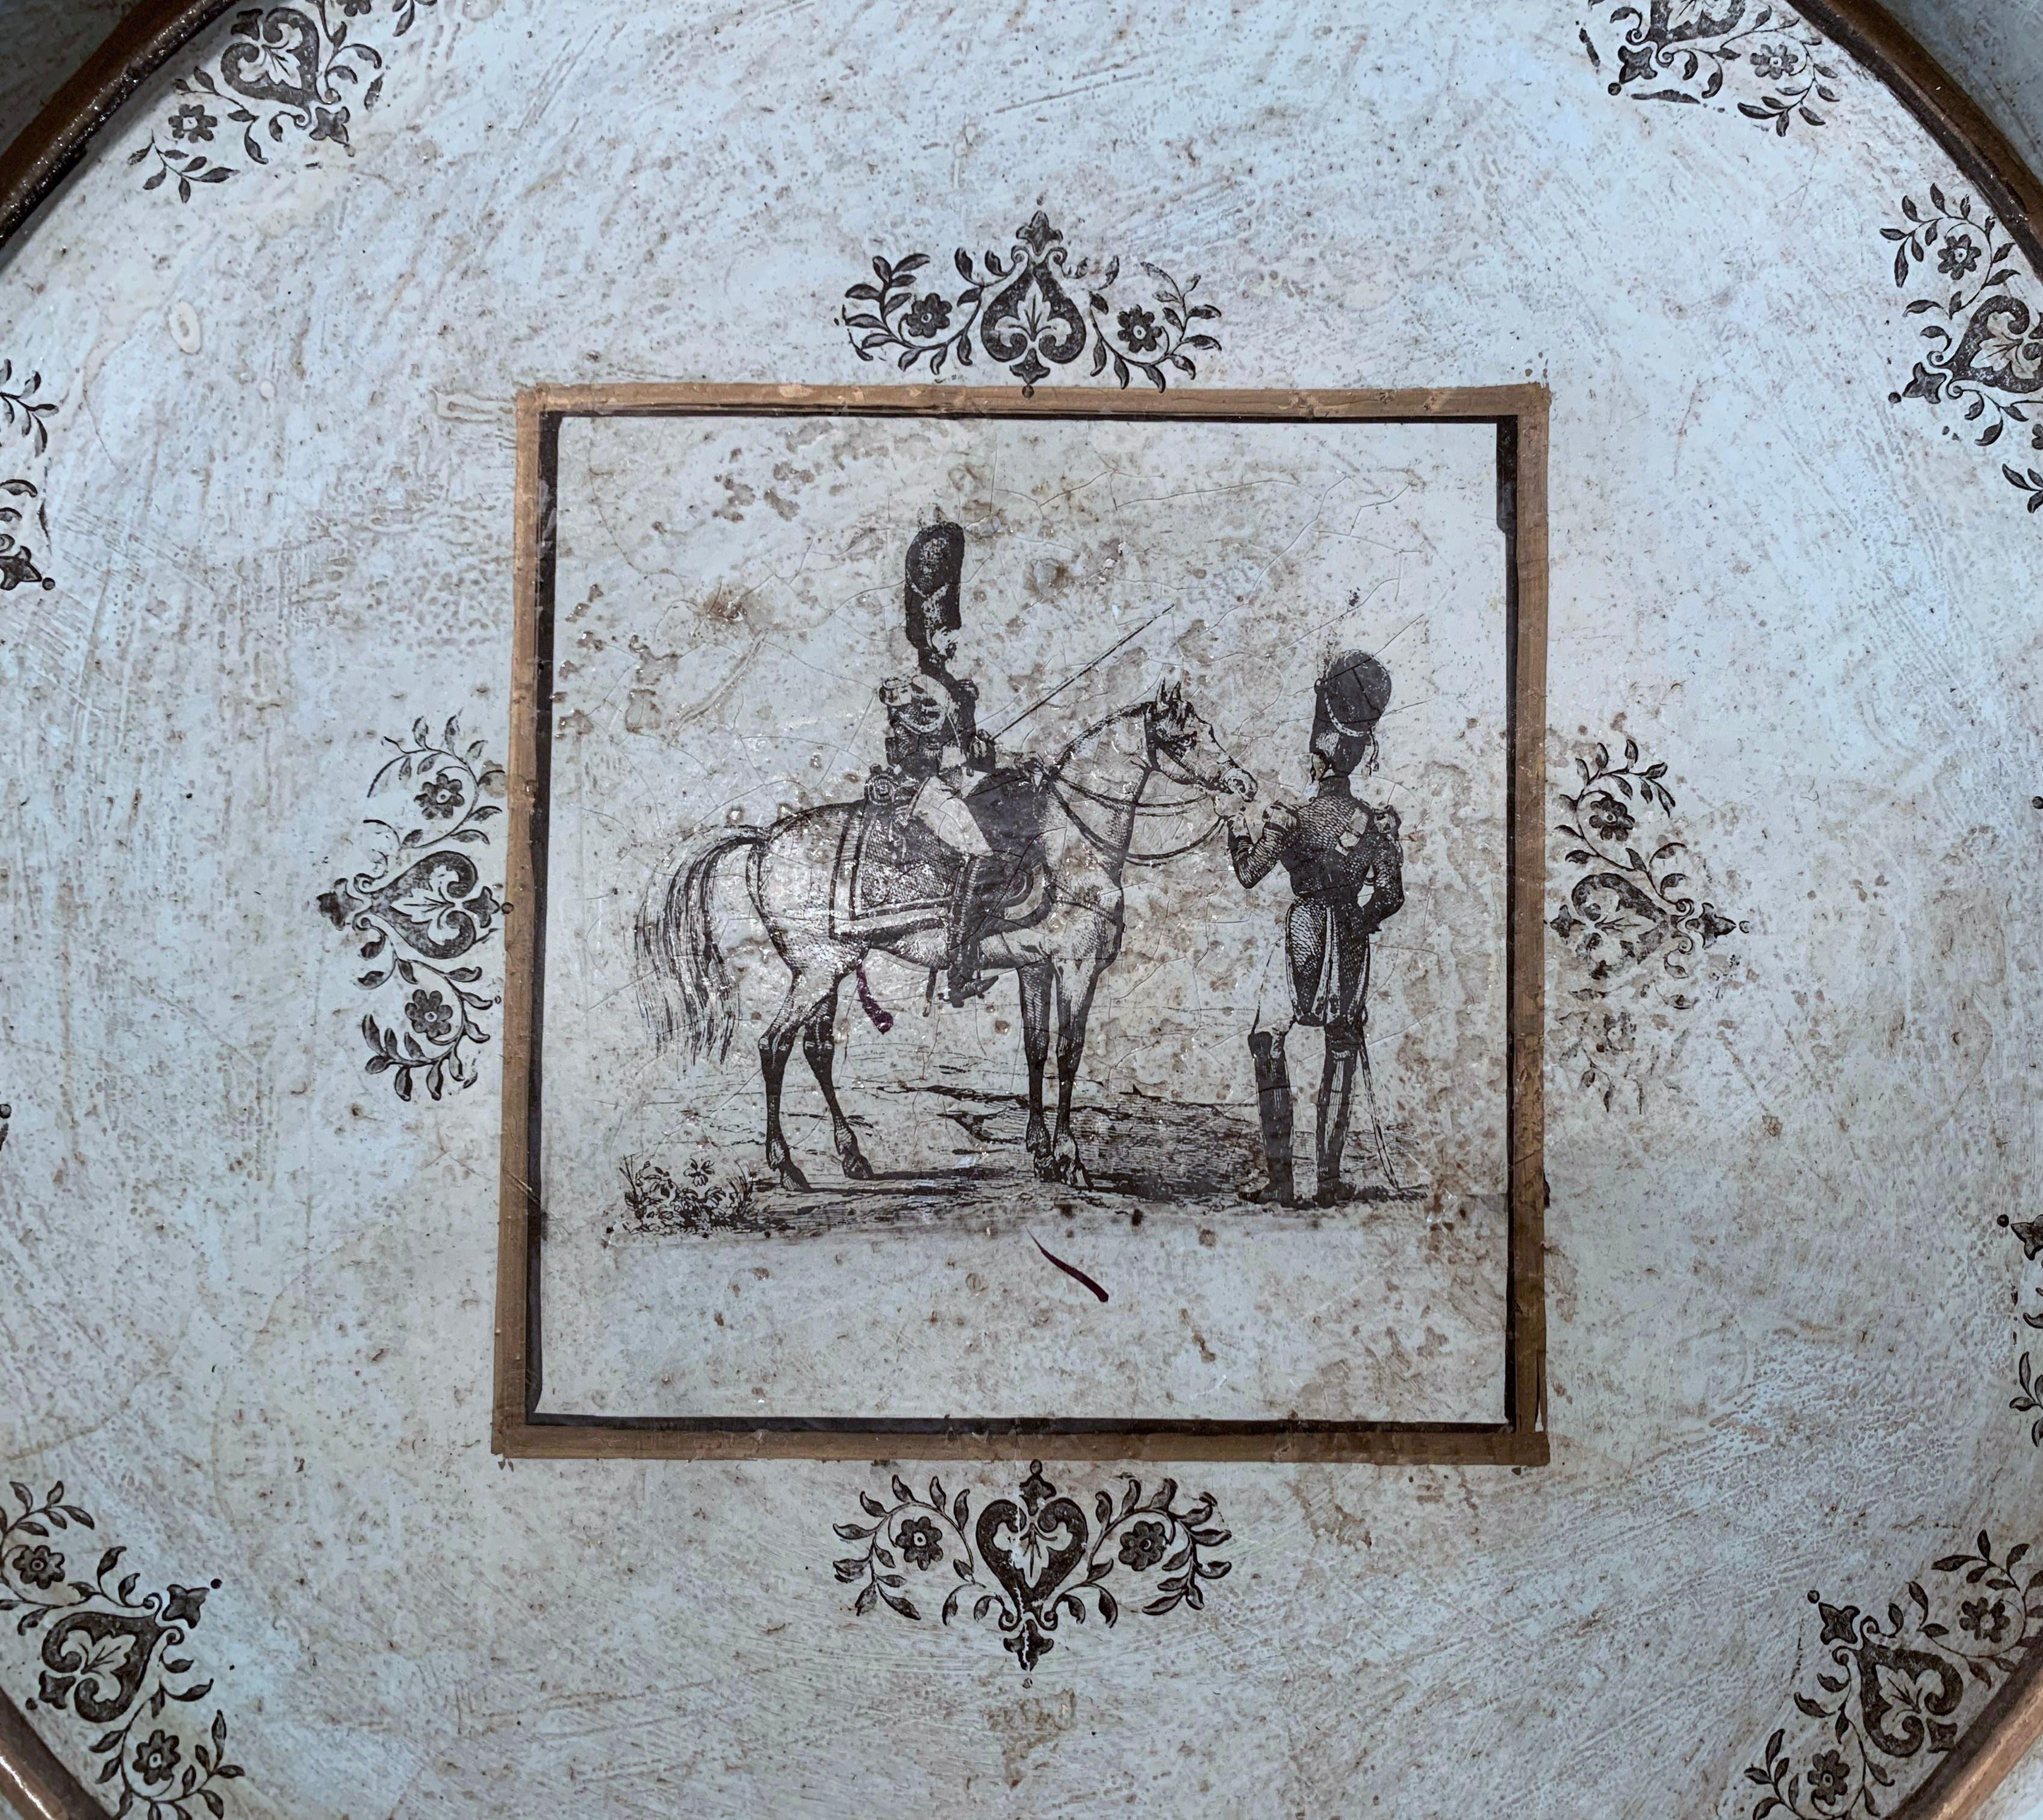 This elegant decorative tray was crafted in France, circa 1820, round in shape, the tole piece has hand painted decor with a center medallion featuring riders and horse in Directoire uniform; the decor is embellished with floral motifs around the